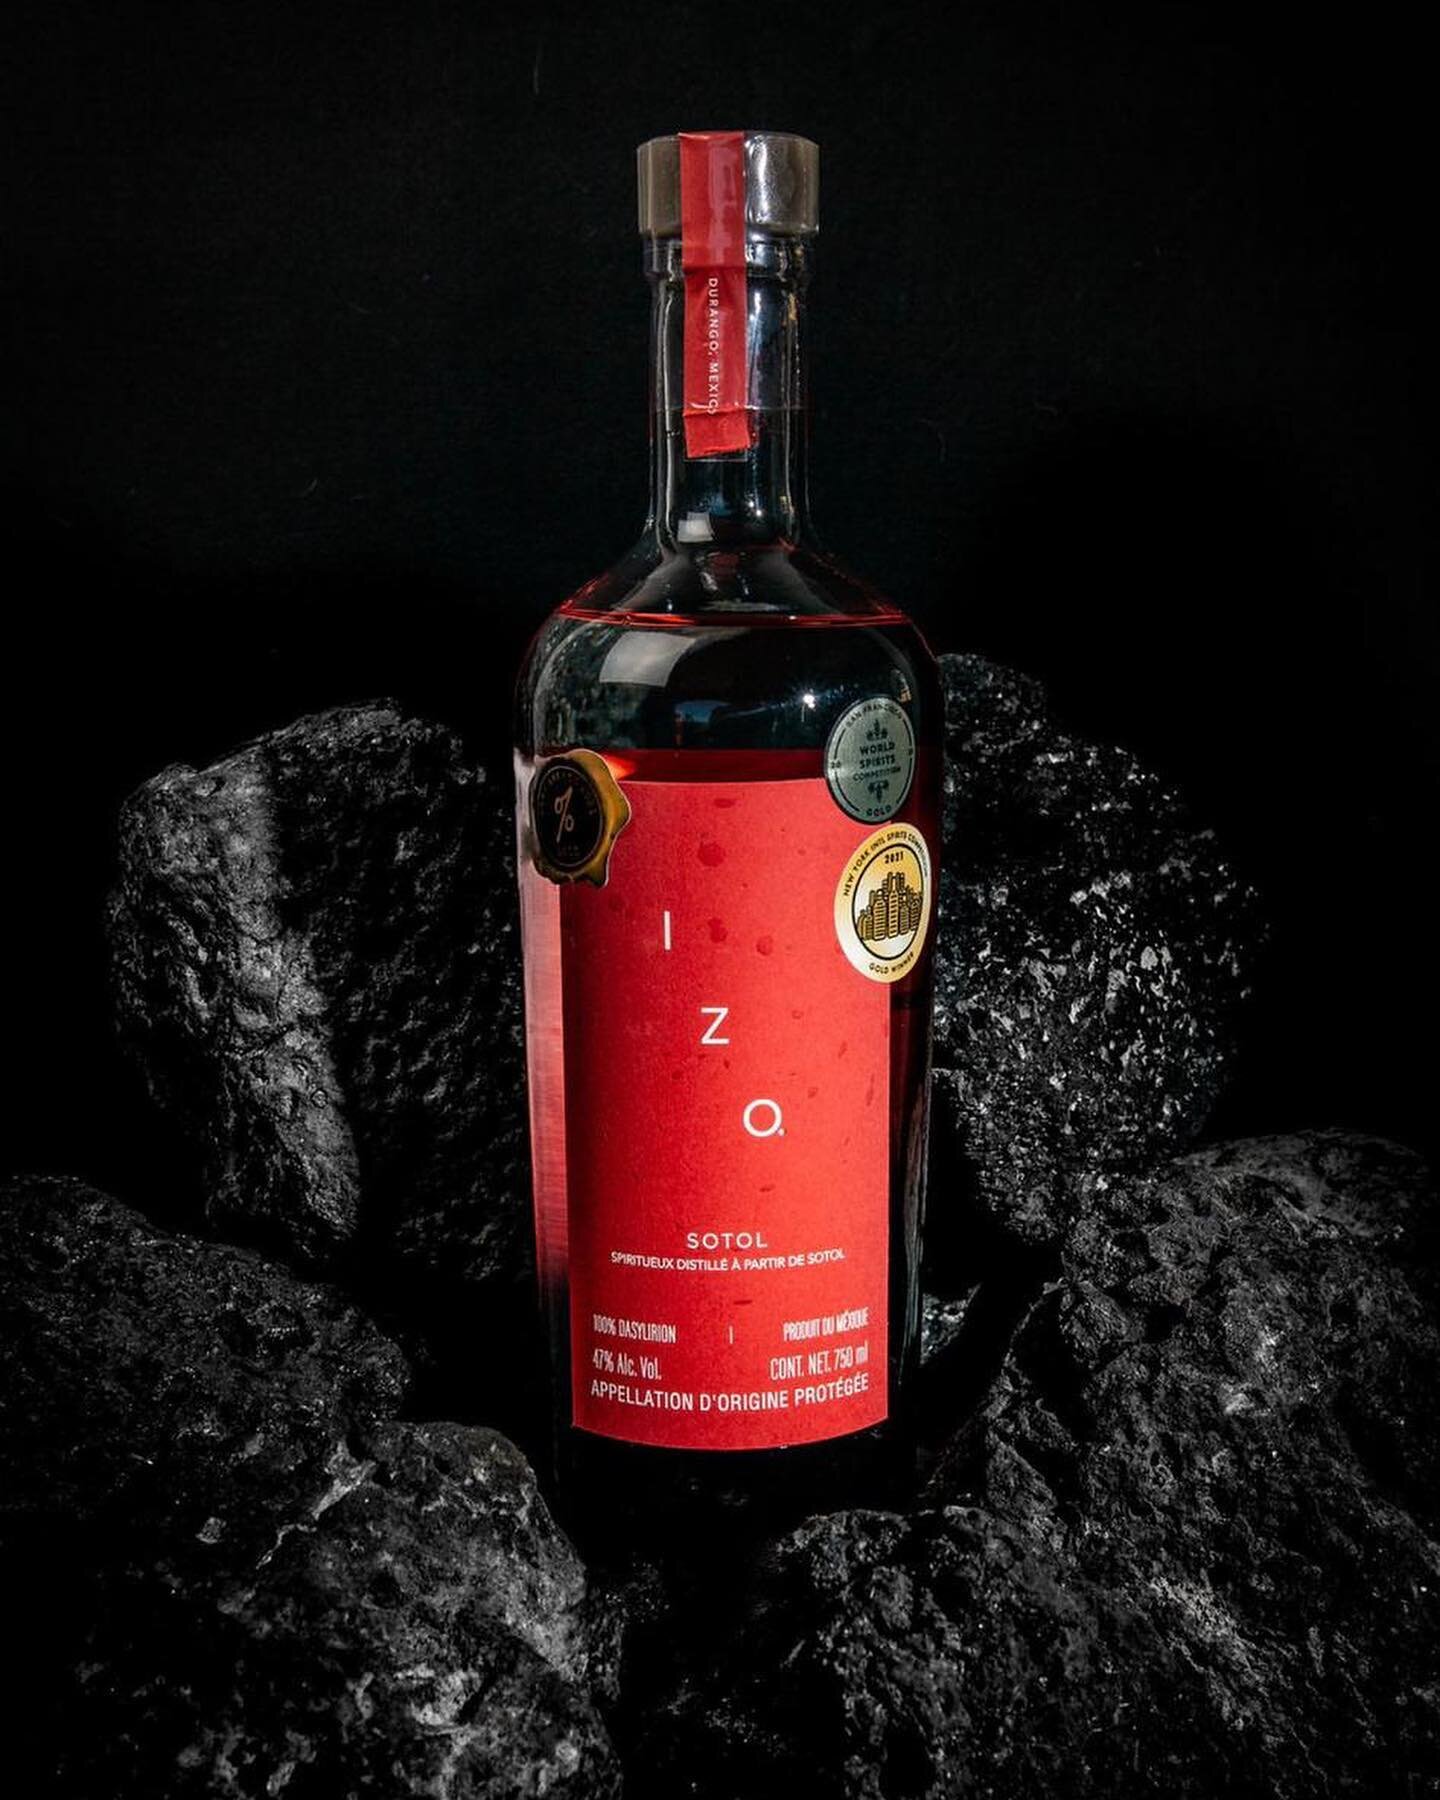 IZO Sotol is crafted from the slow-roasted Dasylirion-Mexican &quot;Desert Spoon&quot; plant. Maturing over 15 years and yielding only one bottle per plant, our slow-distilled Sotol carries hints of the lightly sweet pi&ntilde;as (or &quot;hearts&quo